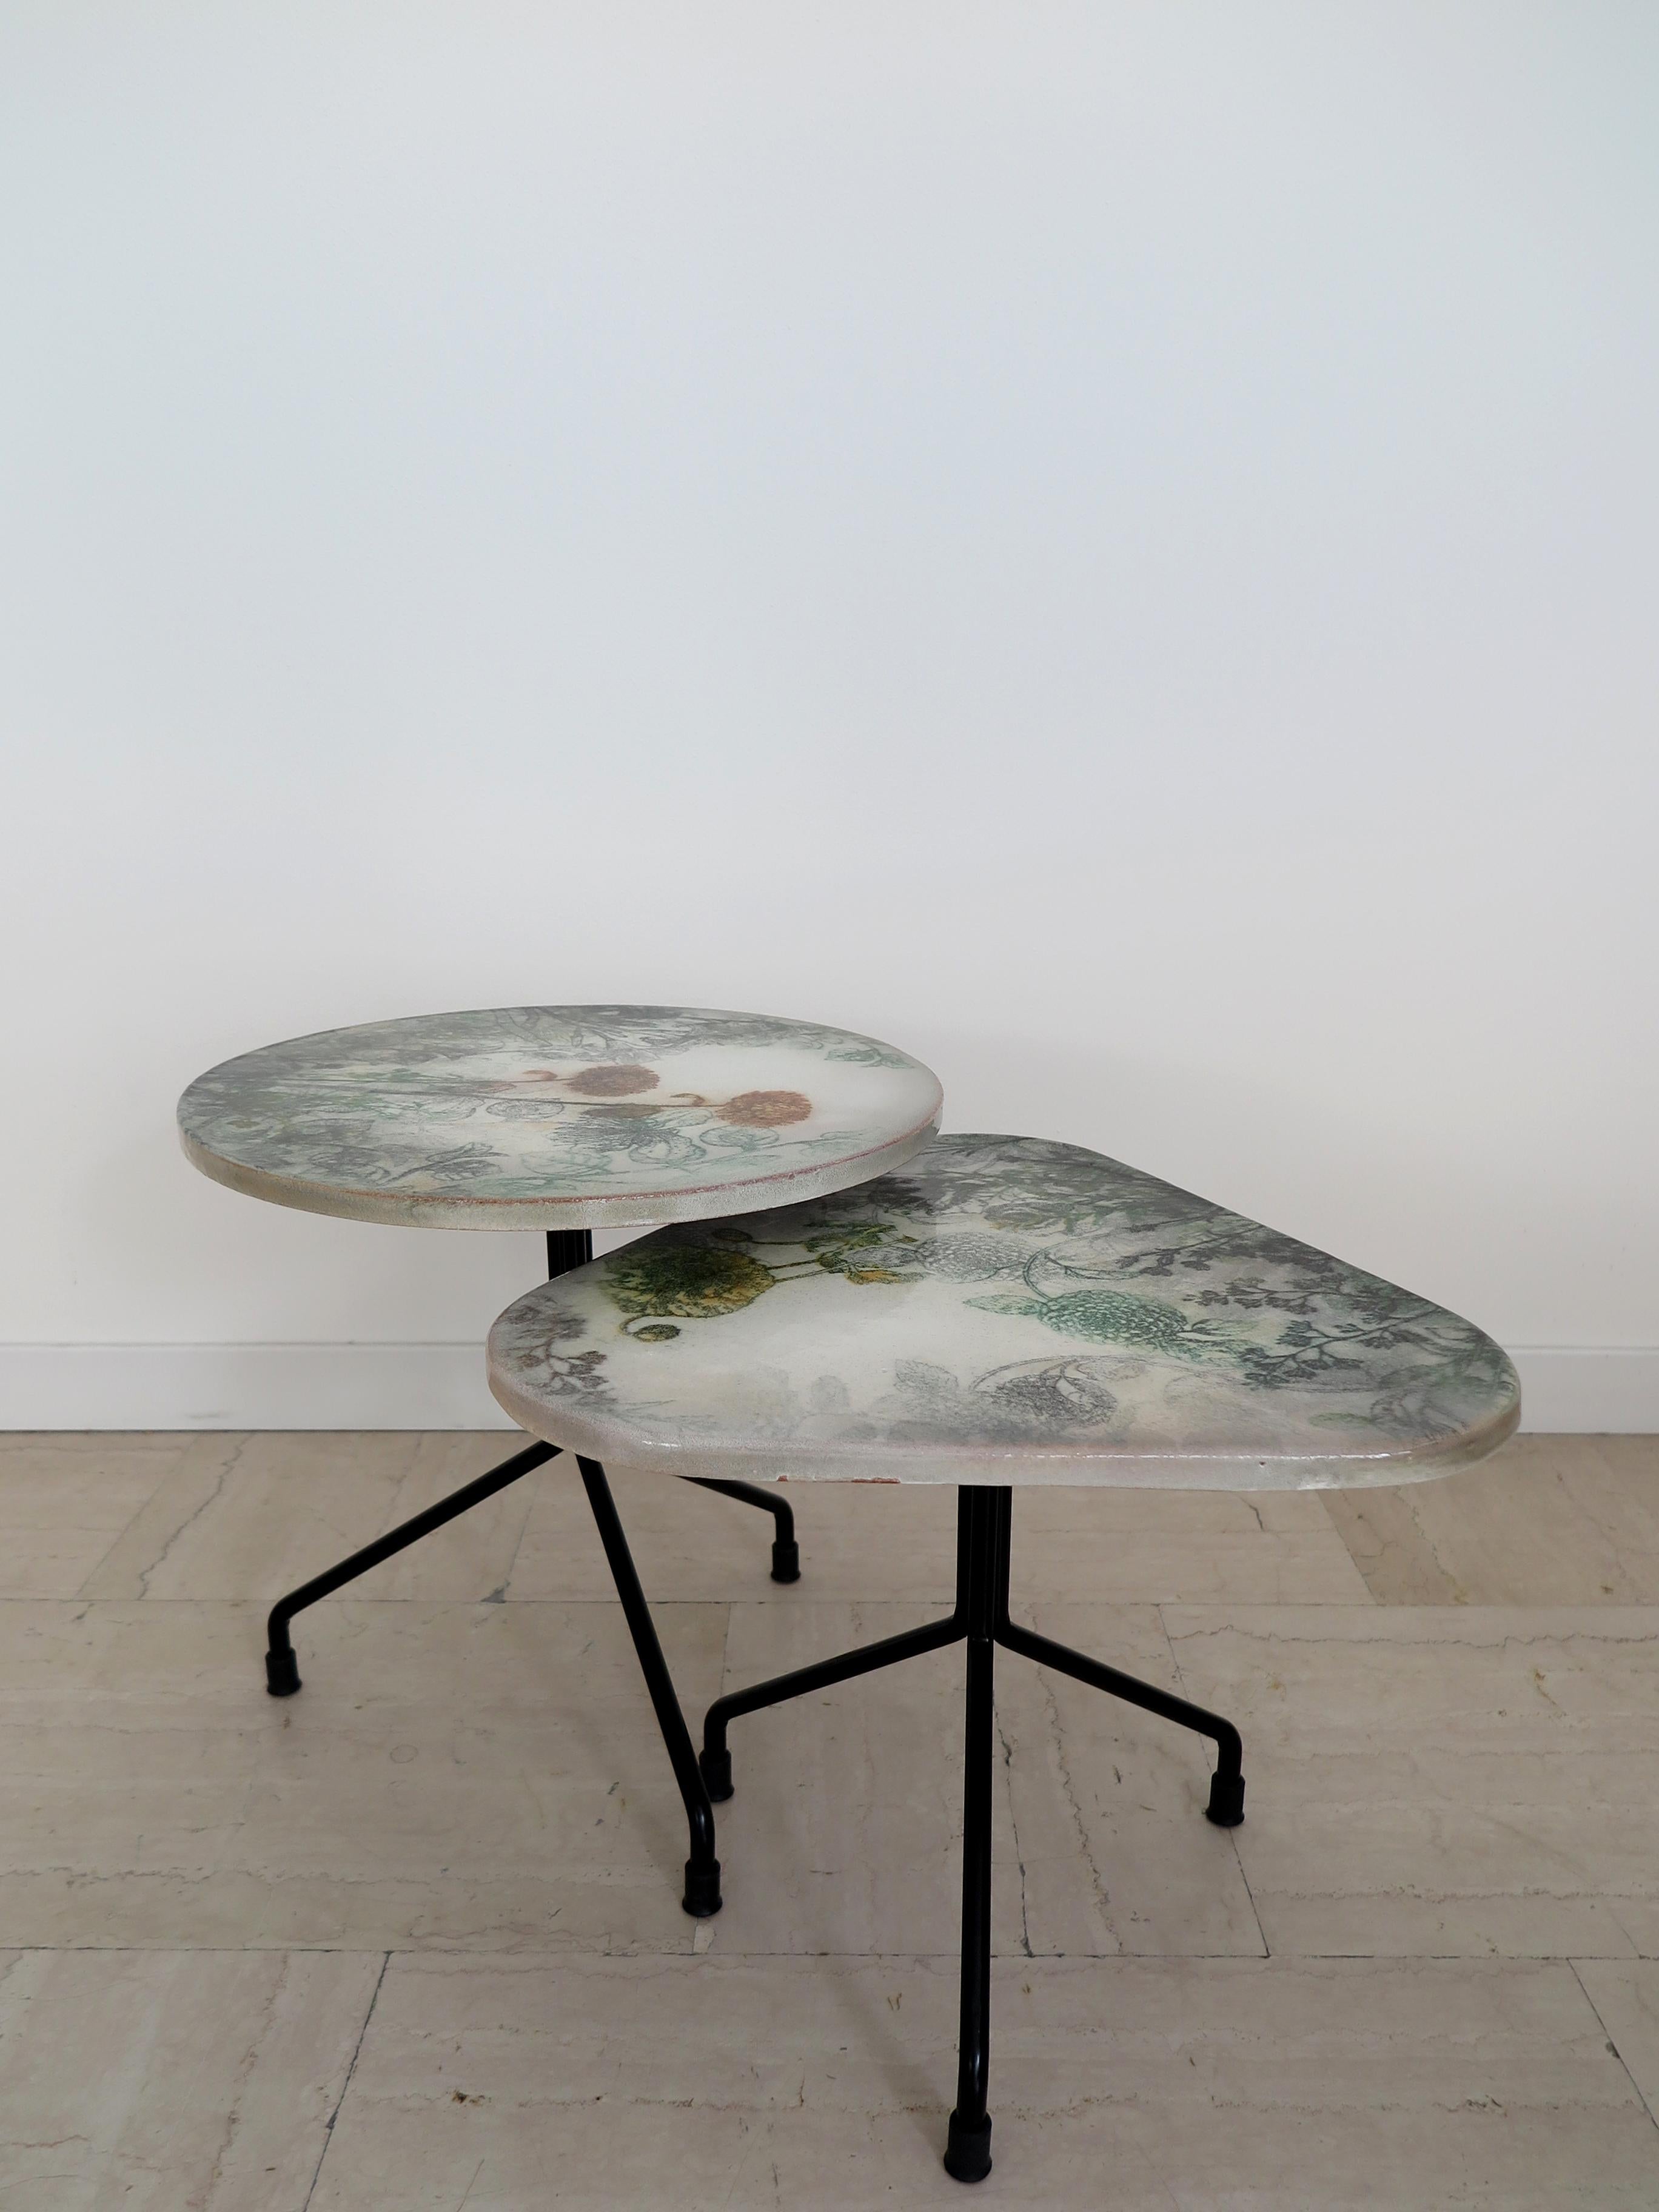 Pair of contemporary Italian coffee tables suitable for both indoor and outdoor use, with round and triangular ceramic tops hand-decorated with spray-painted floral designs; matt black painted metal foot frame.
New Capperidicasa design for